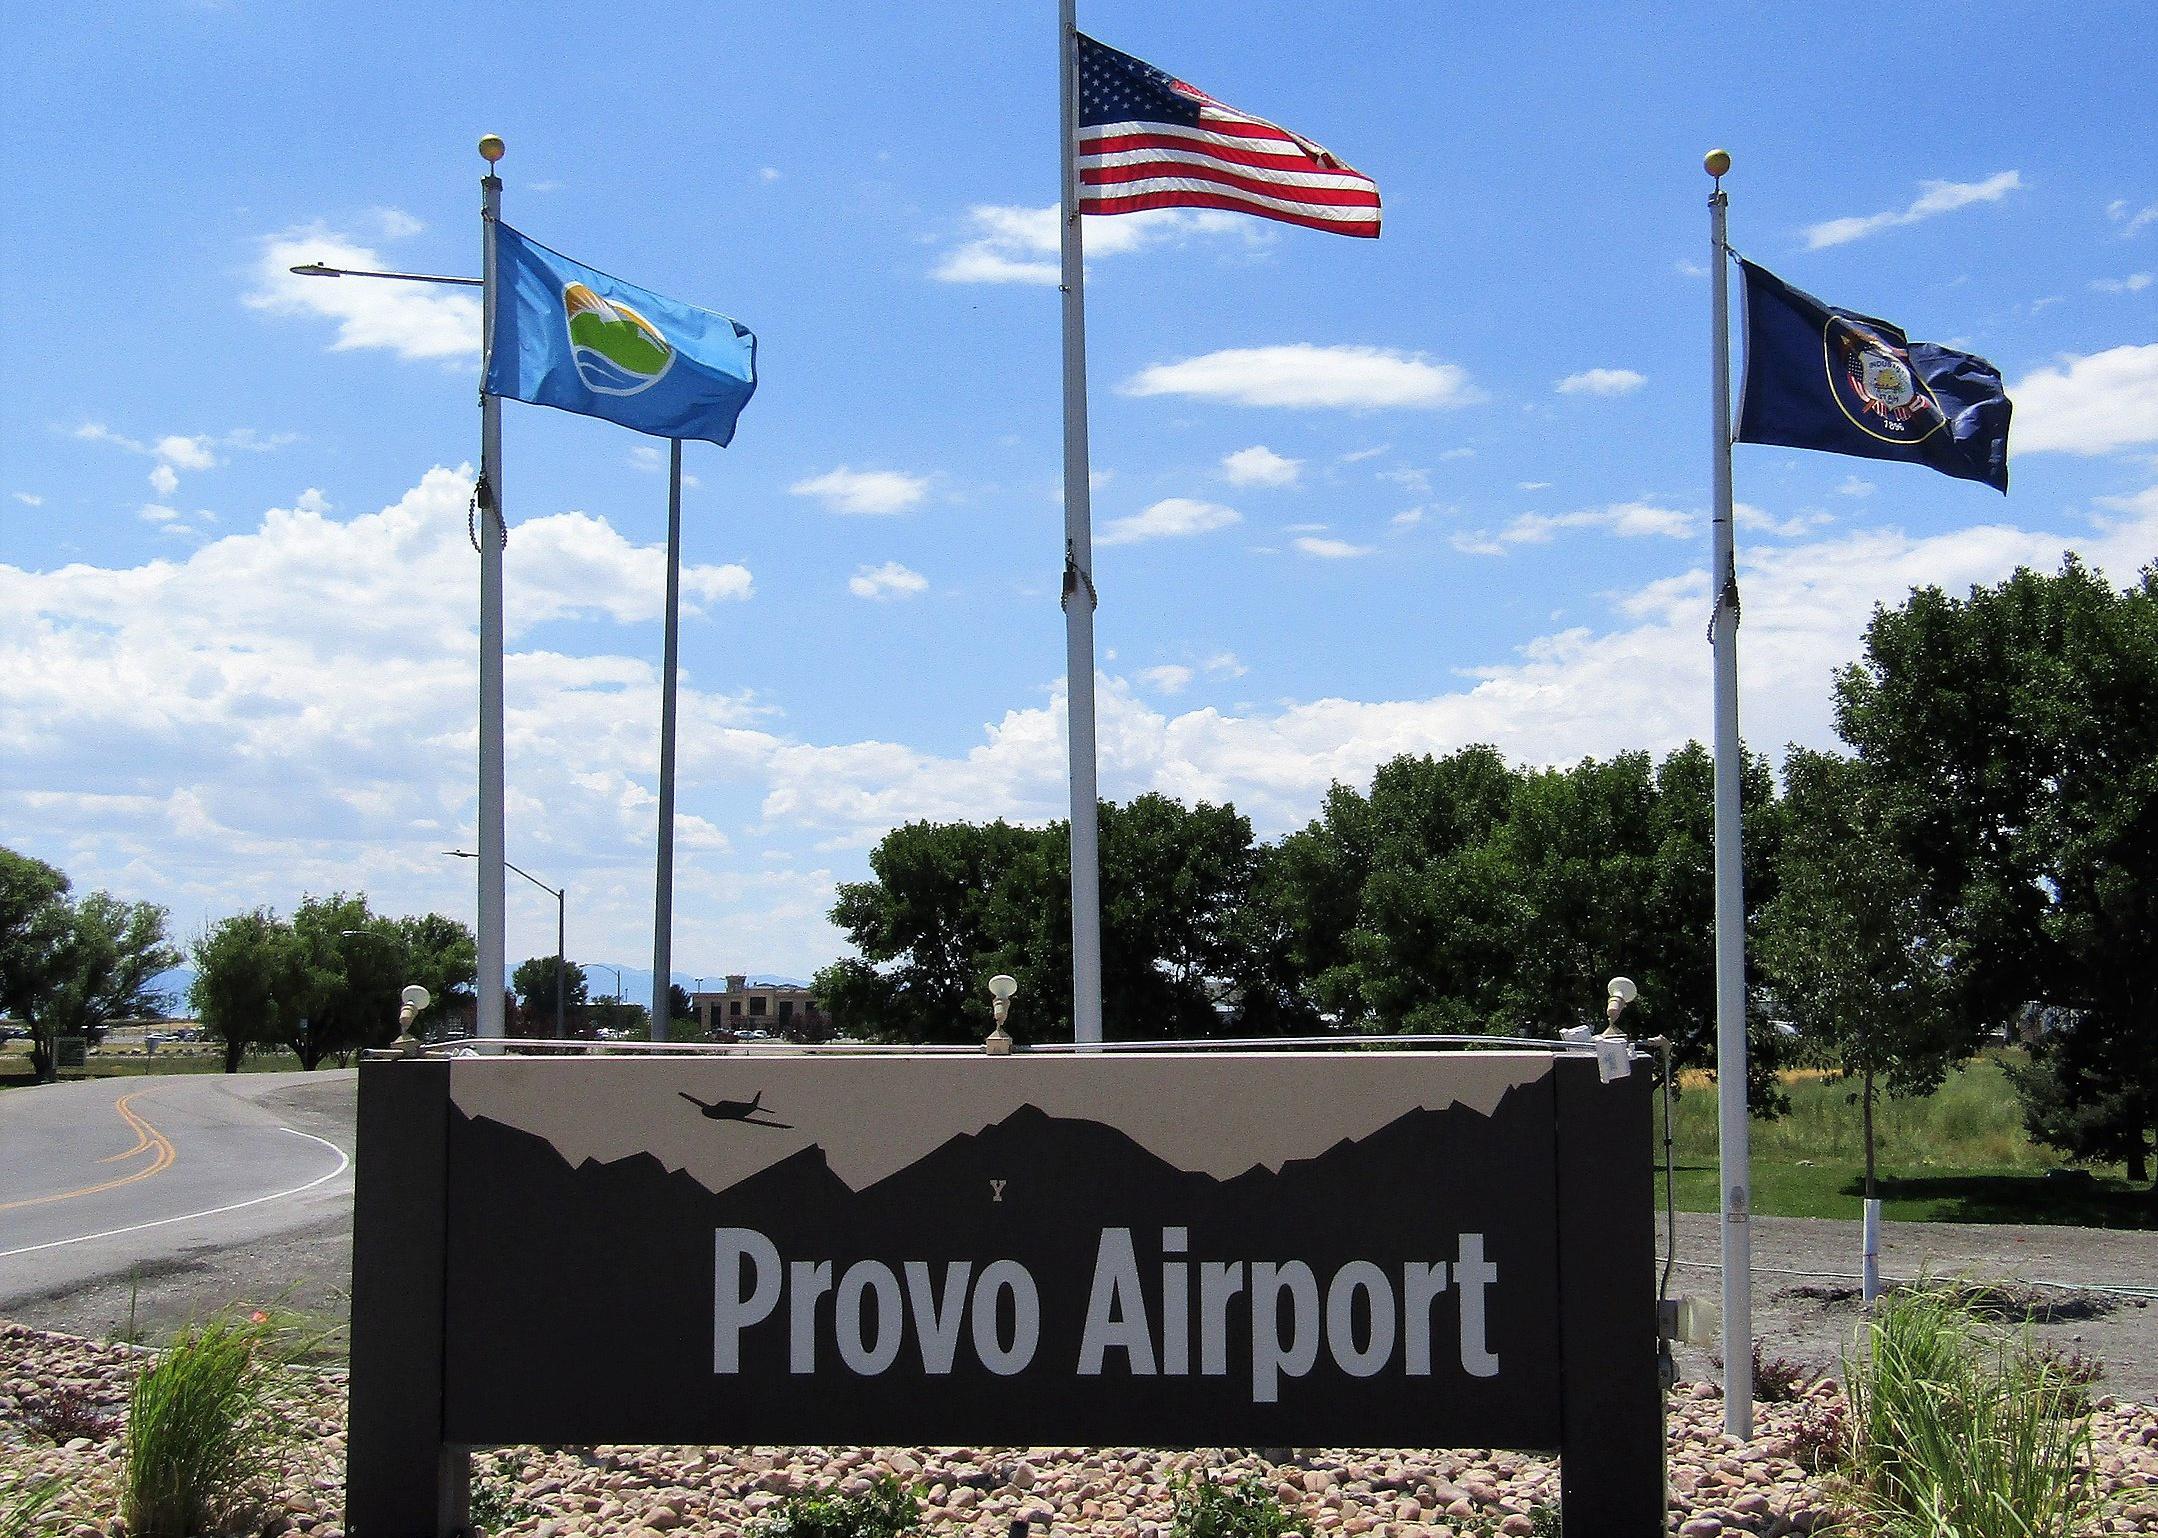 A small airport sign for Provo with flags.